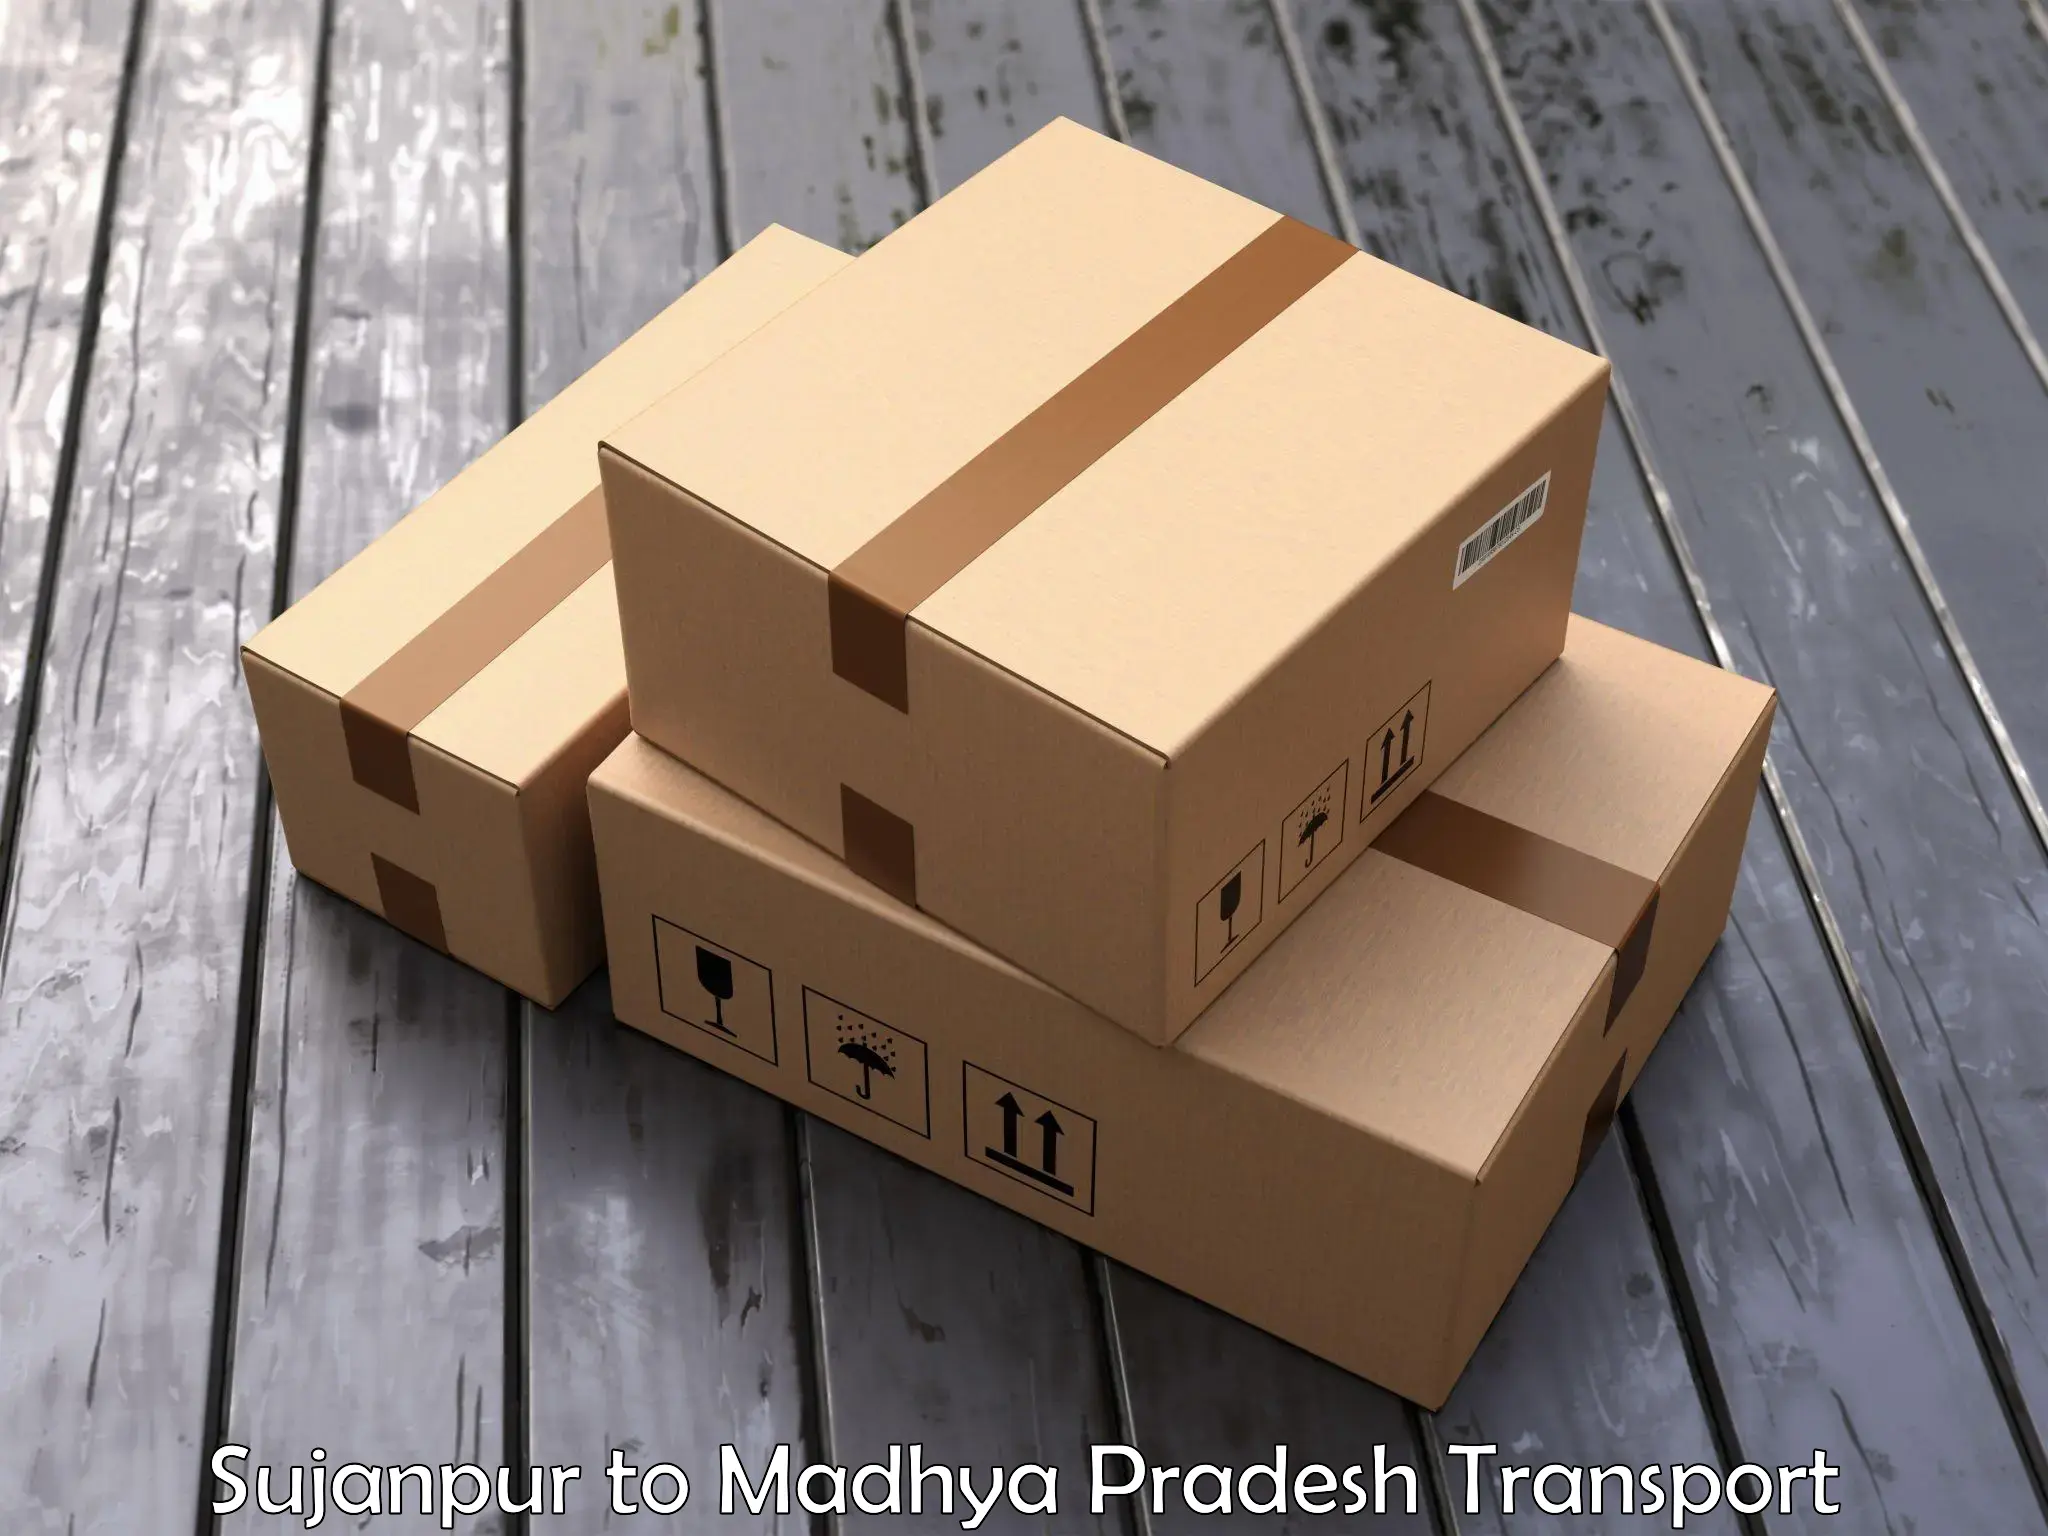 Road transport services in Sujanpur to Madhya Pradesh